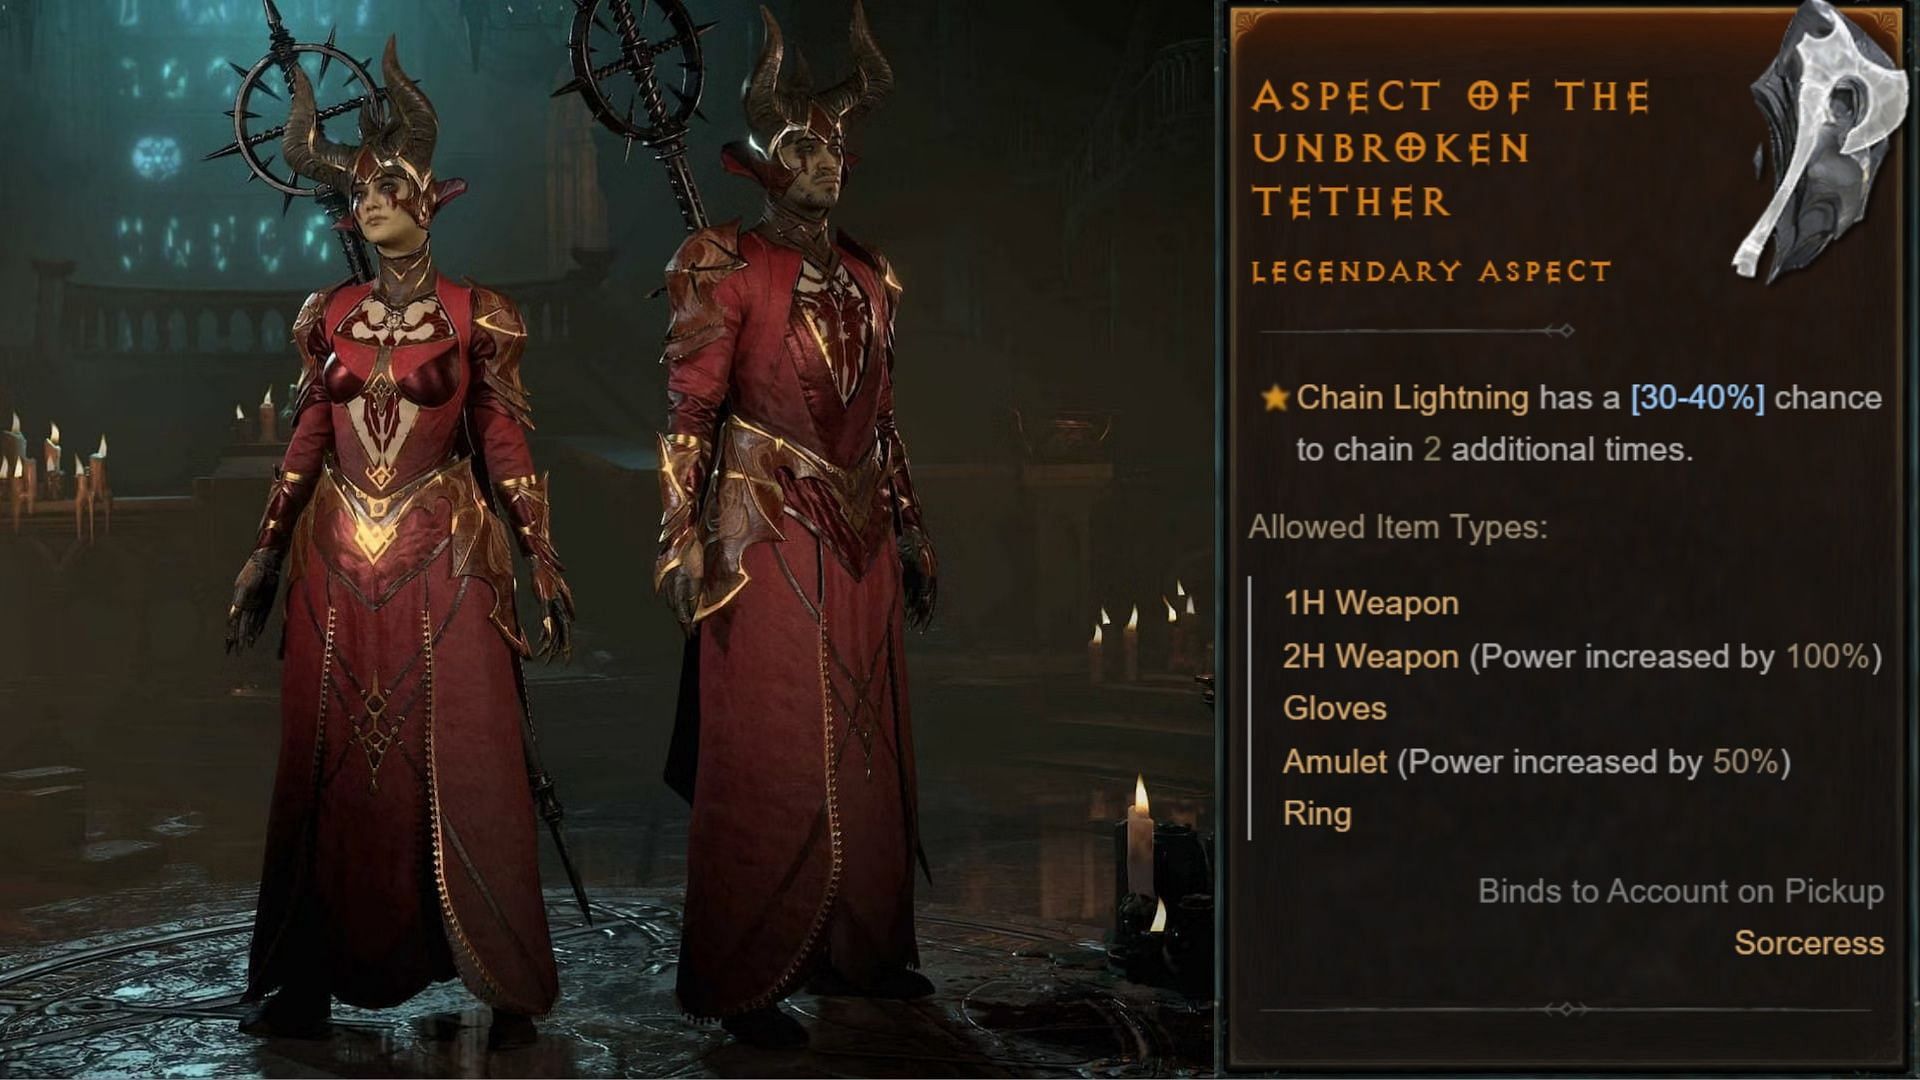 Two Diablo 4 Sorcerers on the left and description of Aspect of Unbroken Tether on the right.